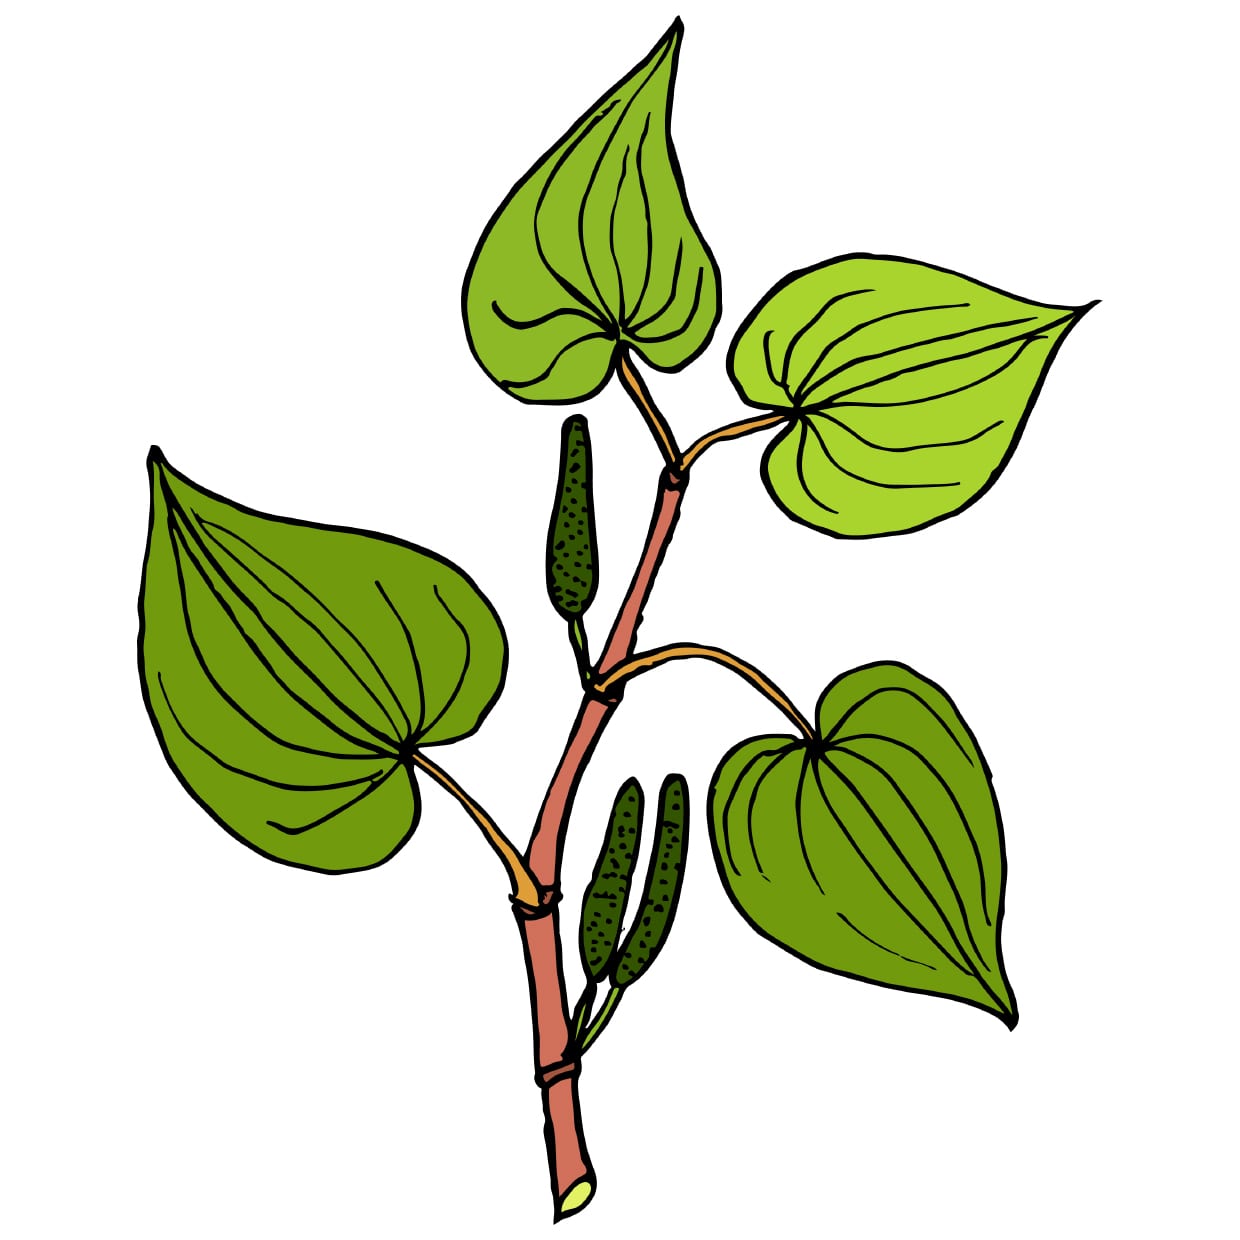 An illustration of a kava plant.